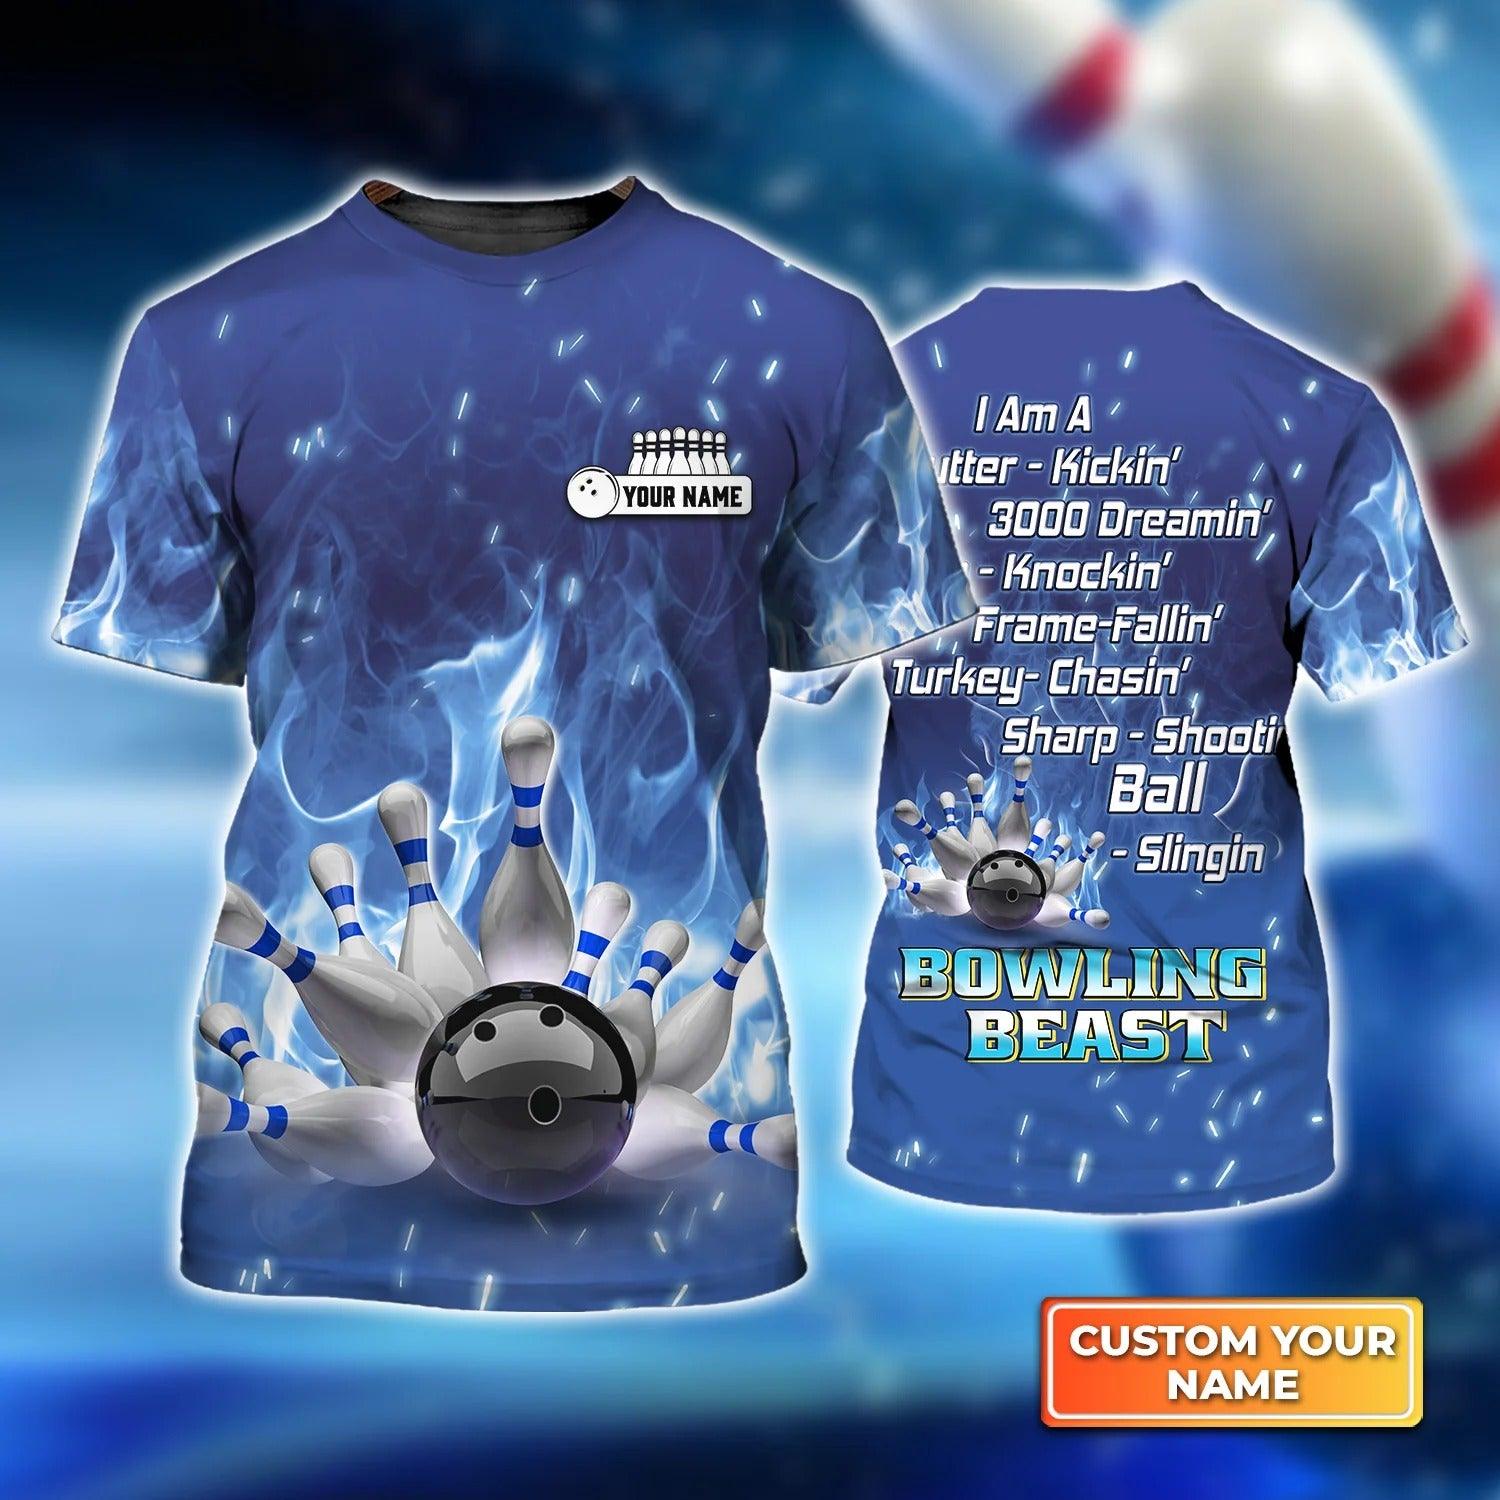 Bowling T shirt Custom Name - Bowling On Blue Fire Bowling Beast Personalized T-shirt - Gift For Friend, Family, Bowling Lovers - Amzanimalsgift